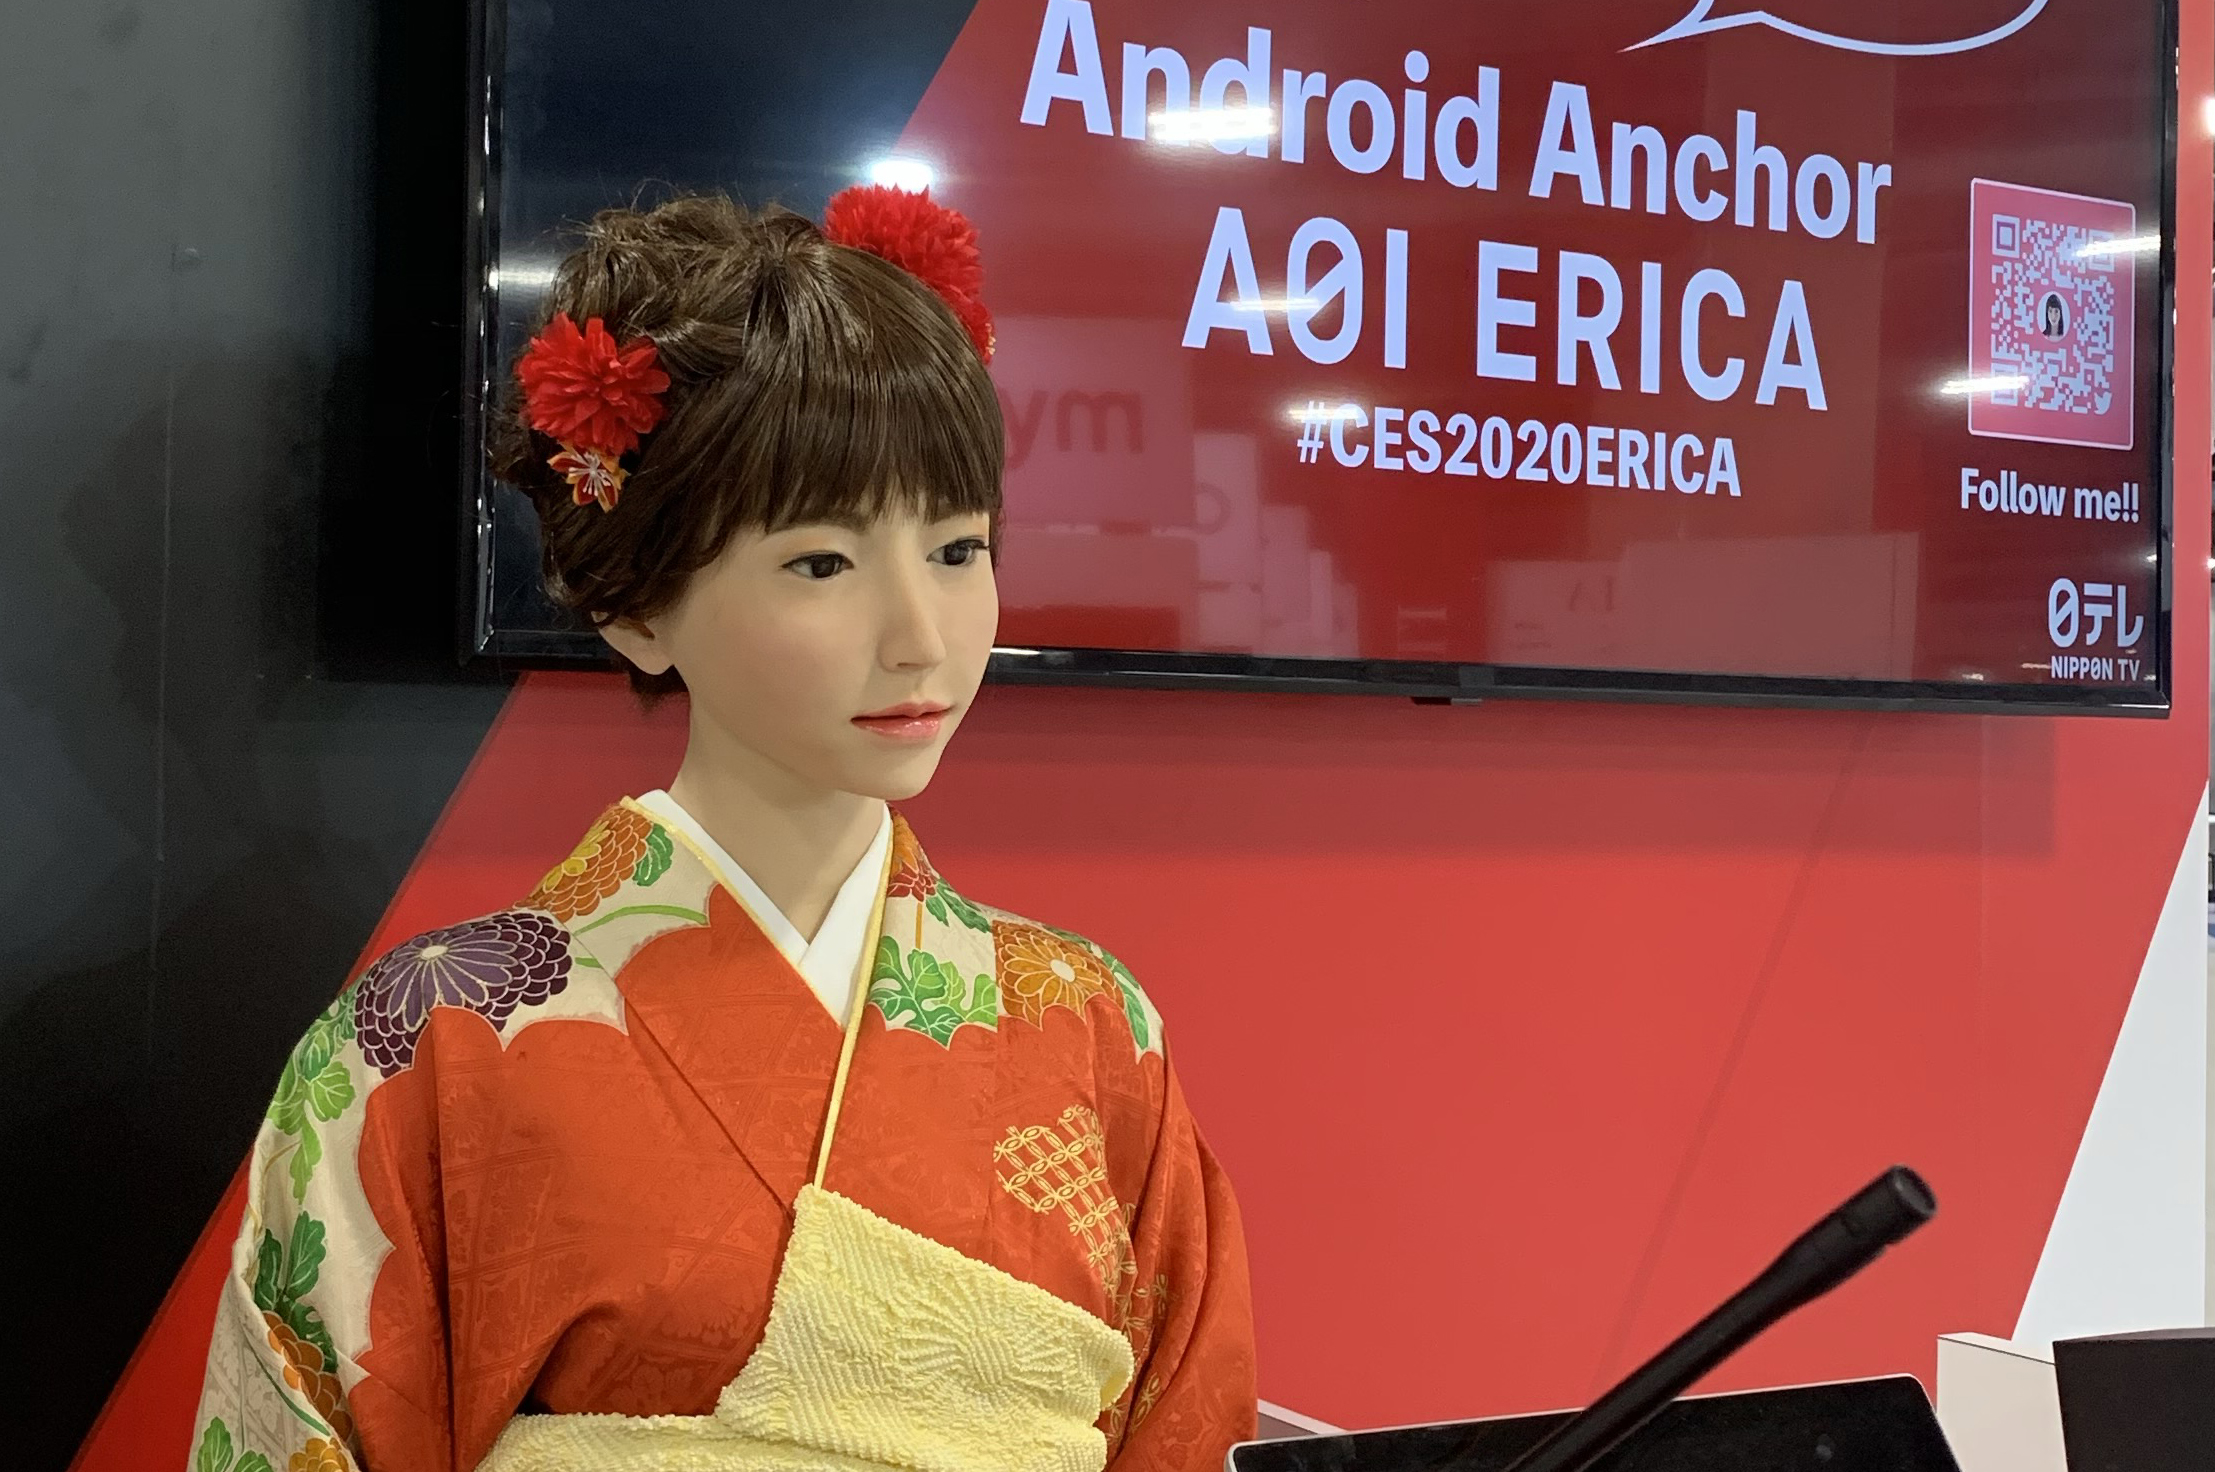 AOI ERICA of Japan TV was exhibited at CES2020